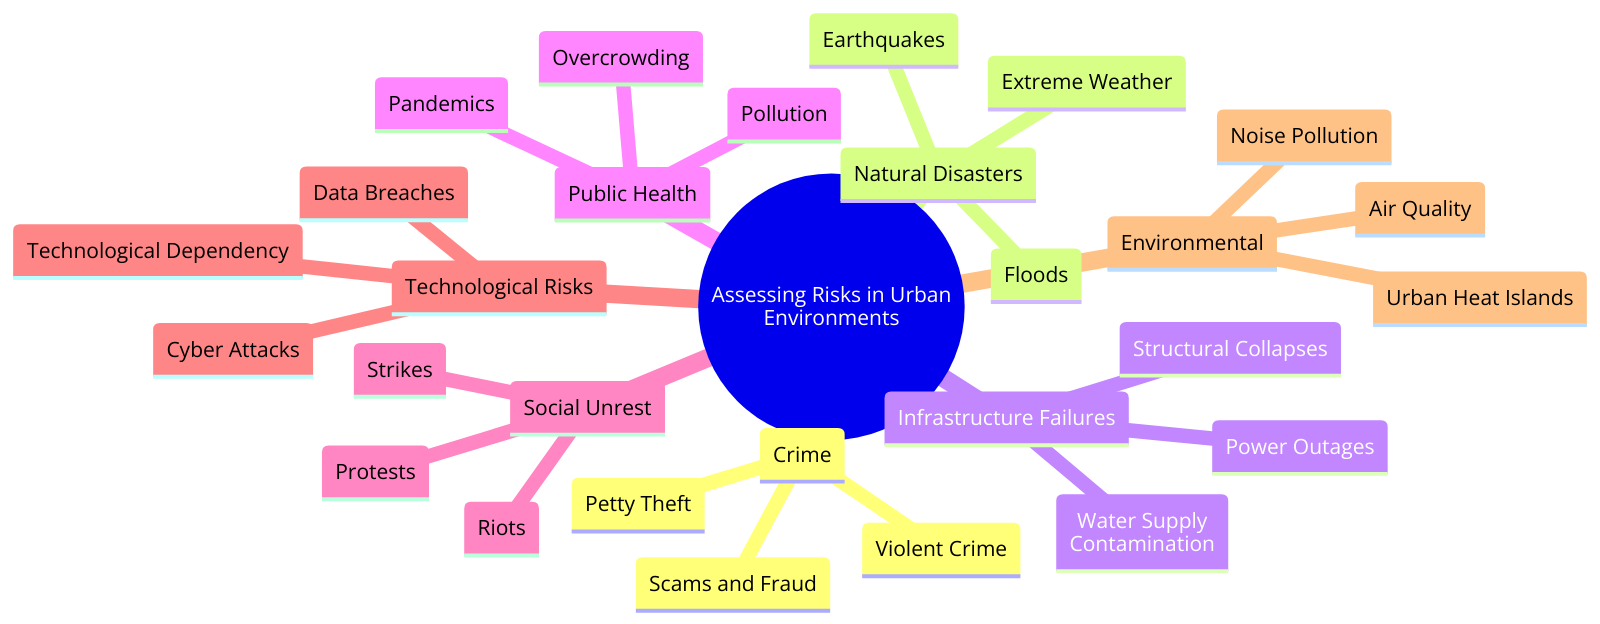 strategies for assessing risks in urban environments, covering aspects such as crime, natural disasters, infrastructure failures, public health, social unrest, technological risks, and environmental concerns